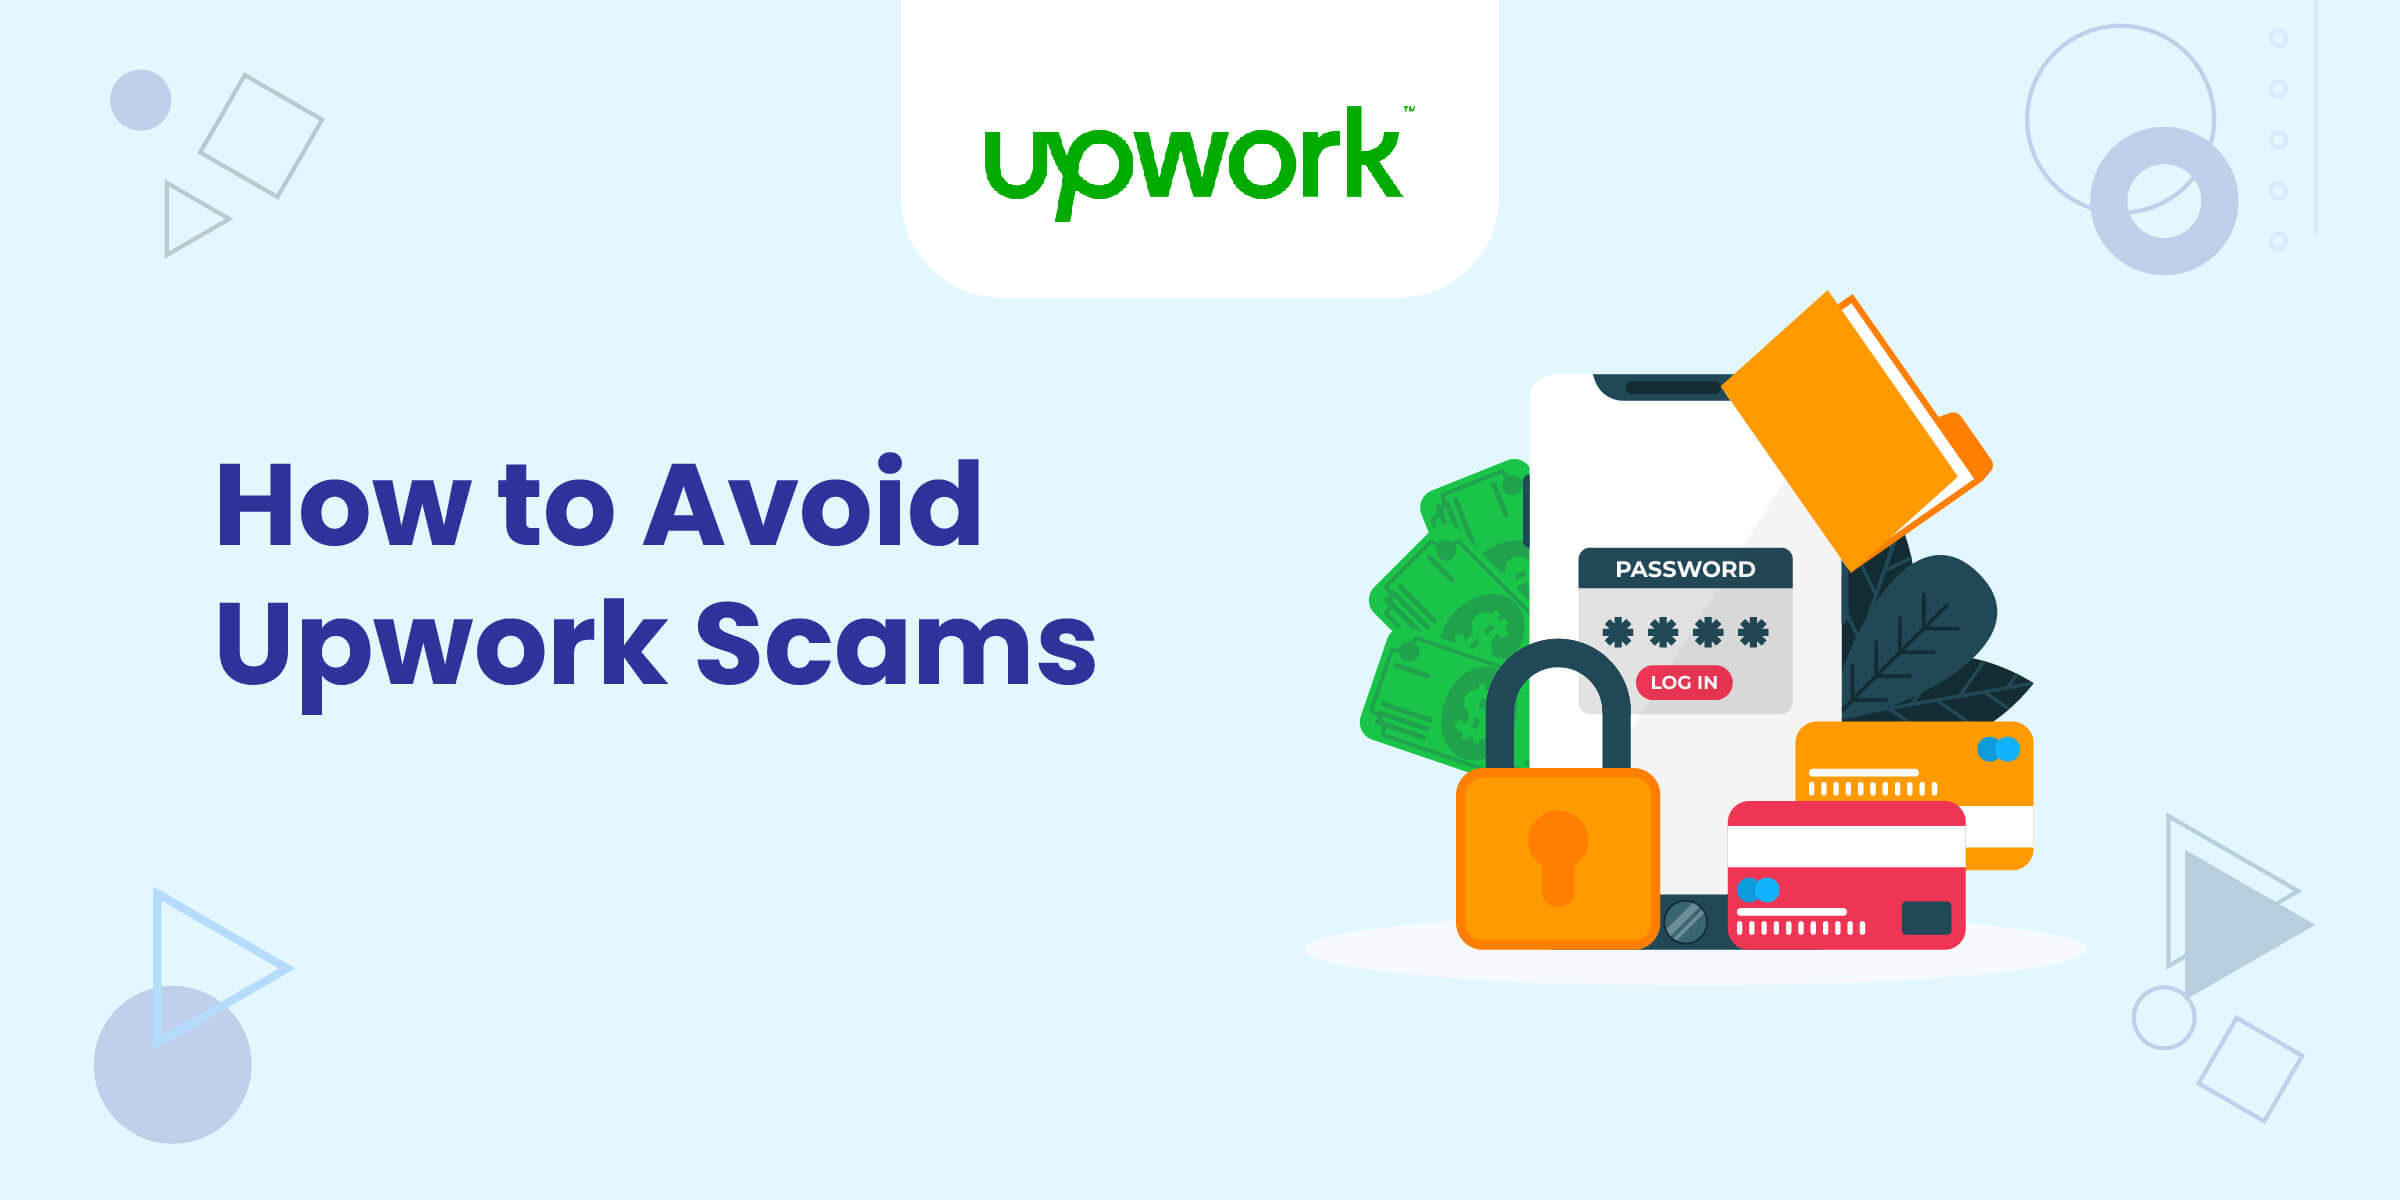 How to Avoid Upwork Scams